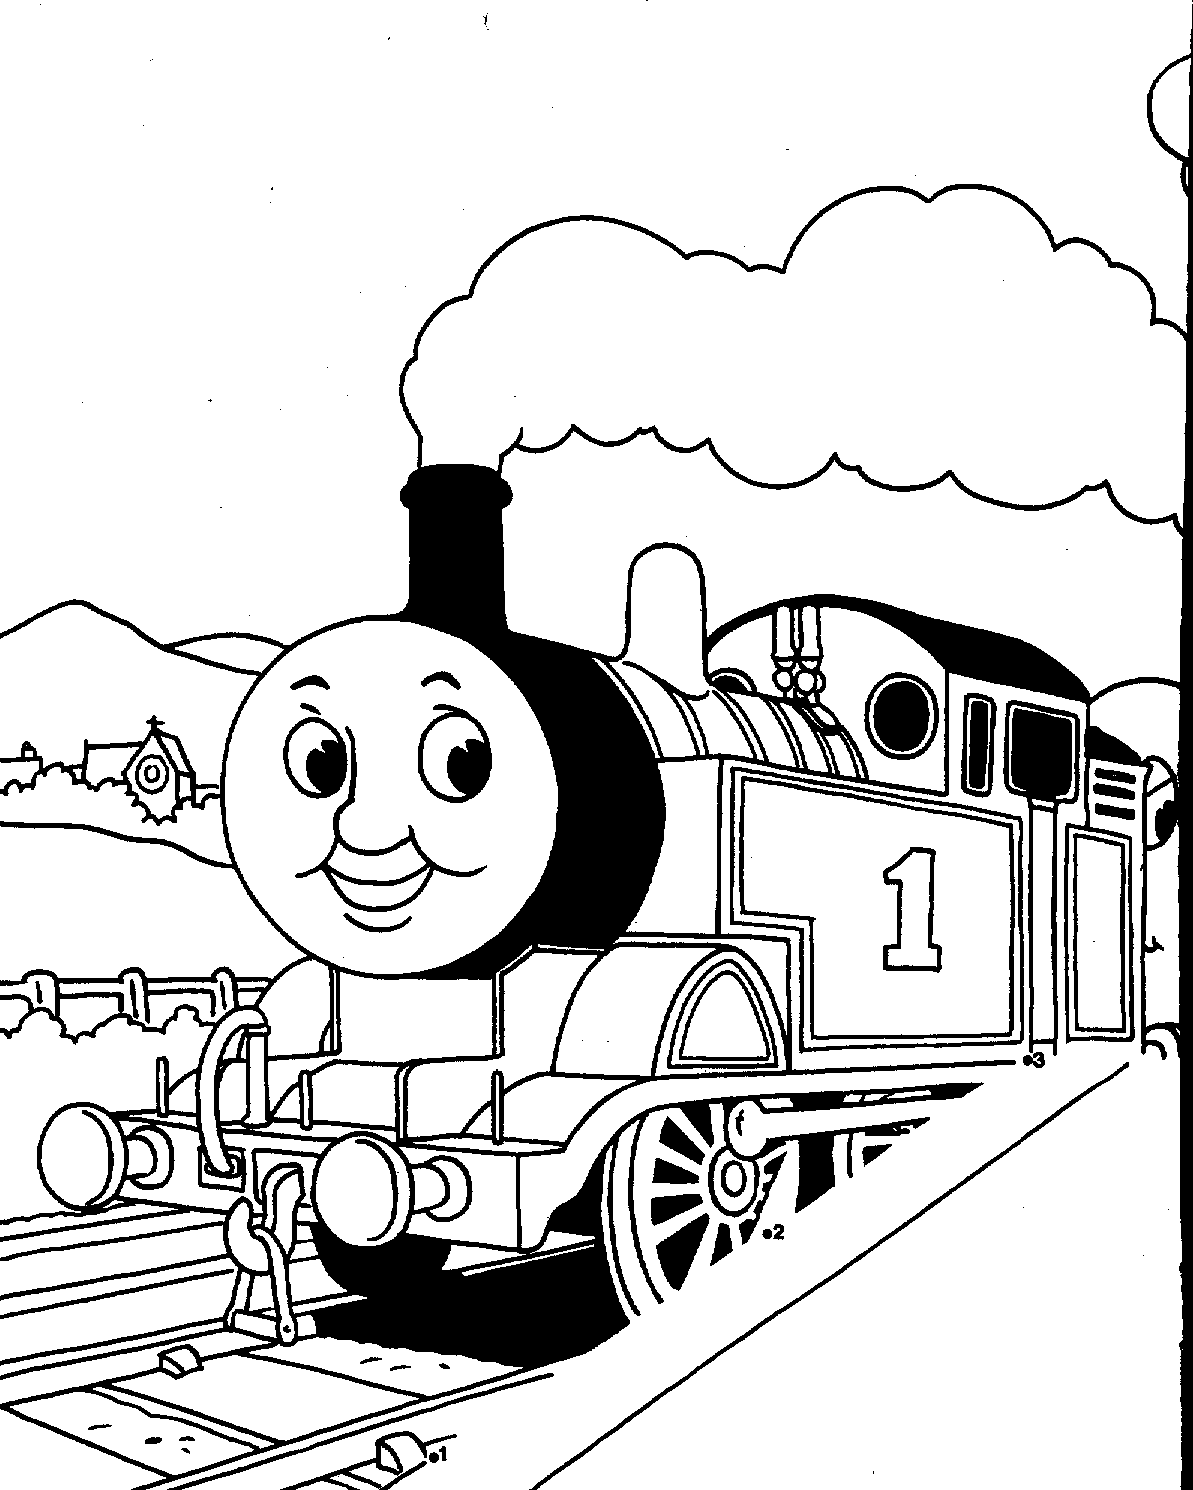 thomas-the-train coloring page,printable,coloring pages